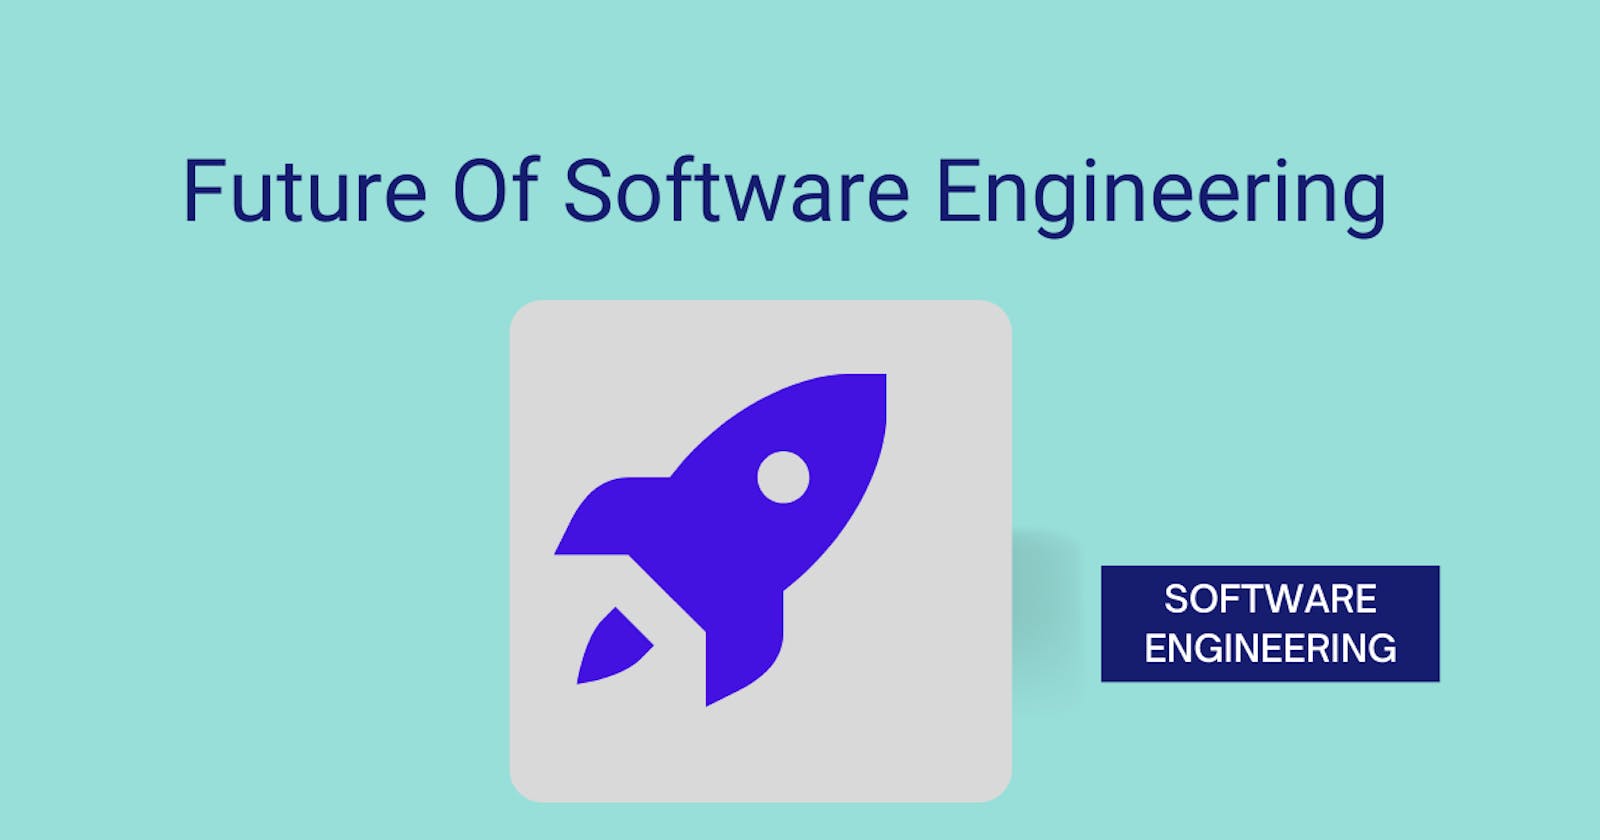 What Will The Future Of Software Engineering Look Like?